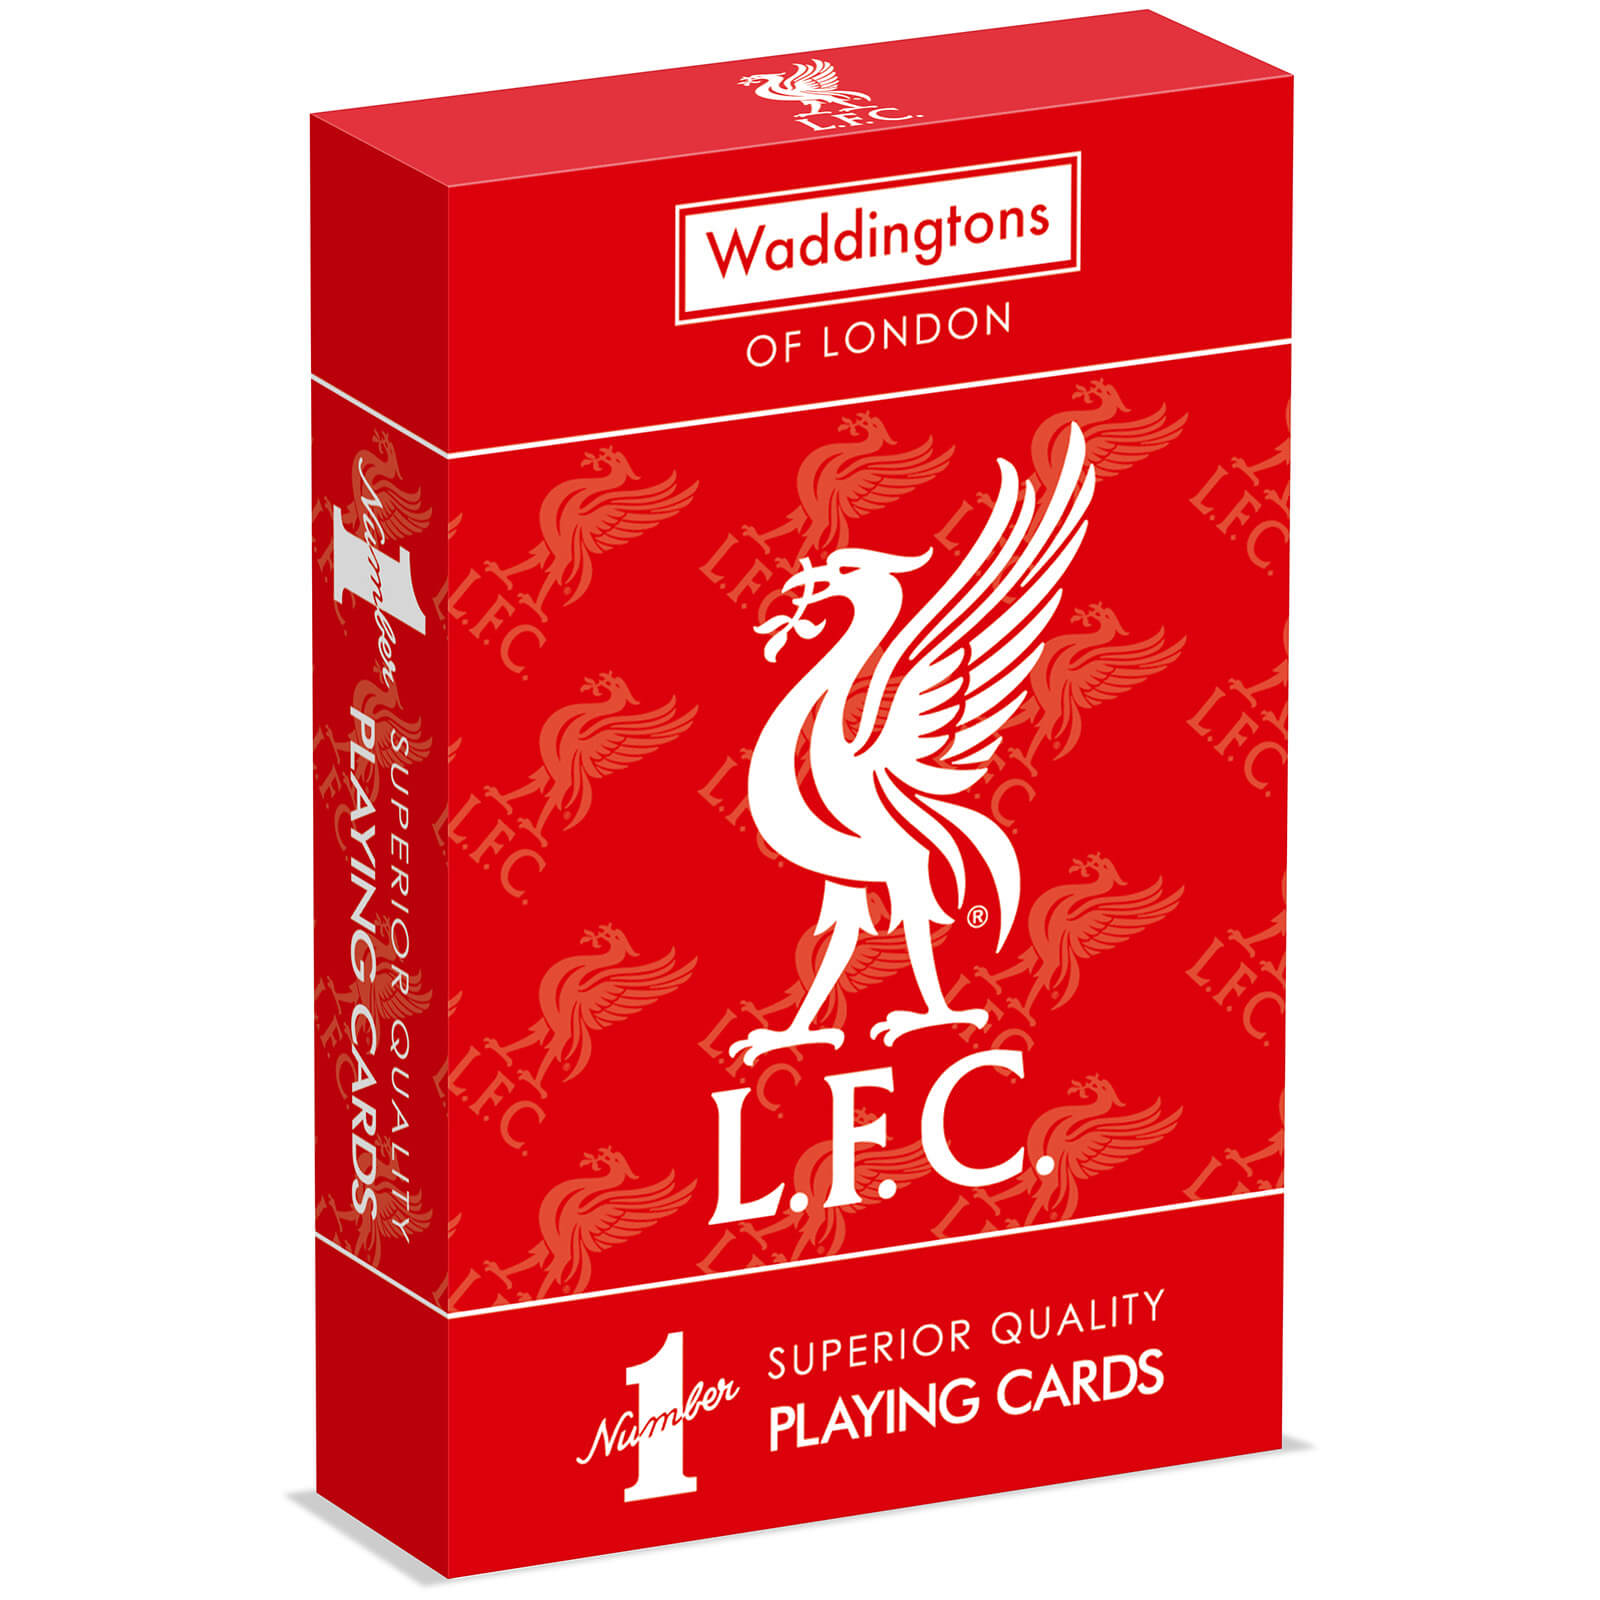 Waddingtons Number 1 Playing Cards - Liverpool FC 21/22 Edition